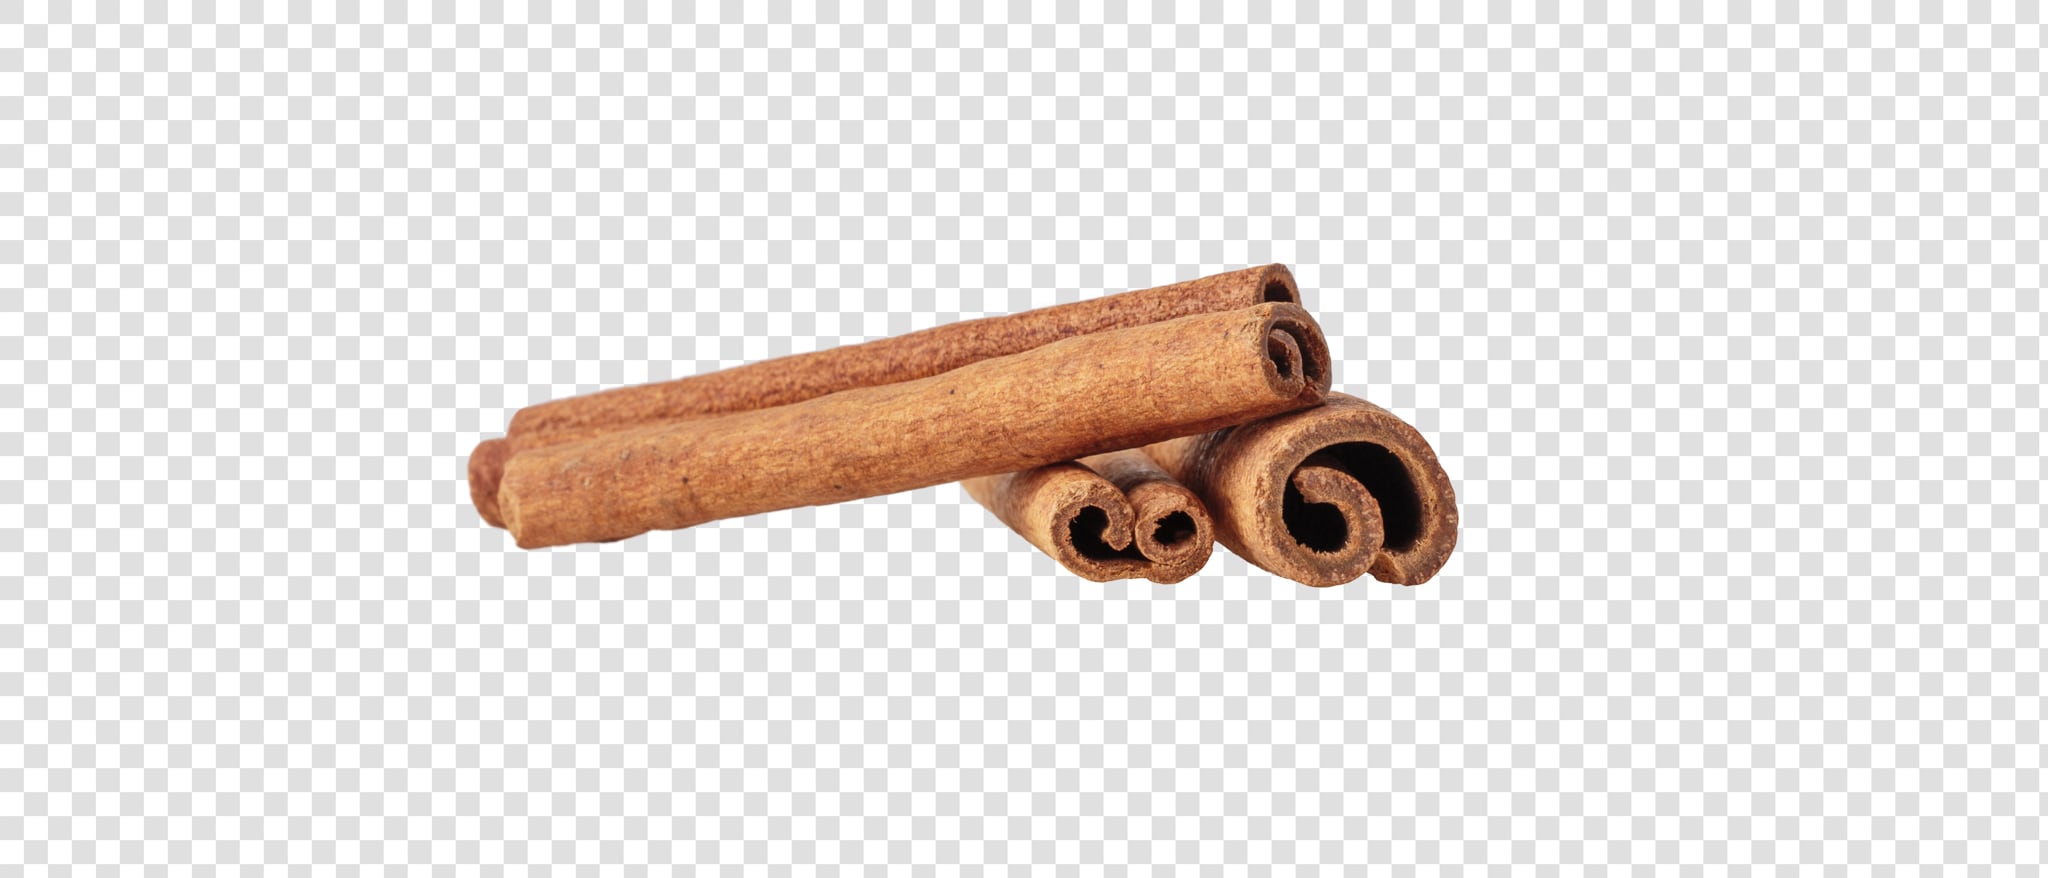 Cinnamon image with transparent background